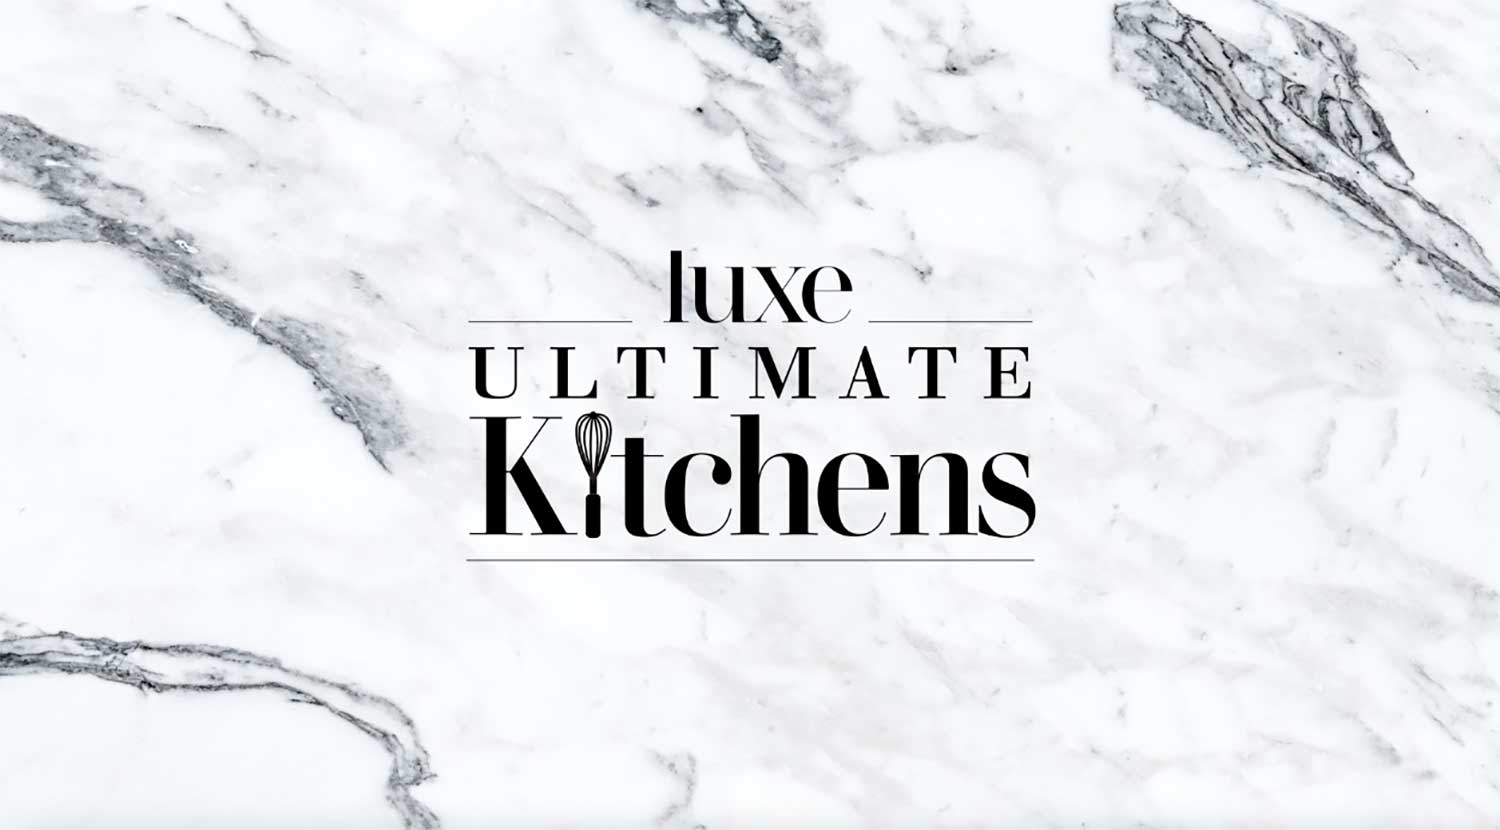 luxe ultimate kitchen logo